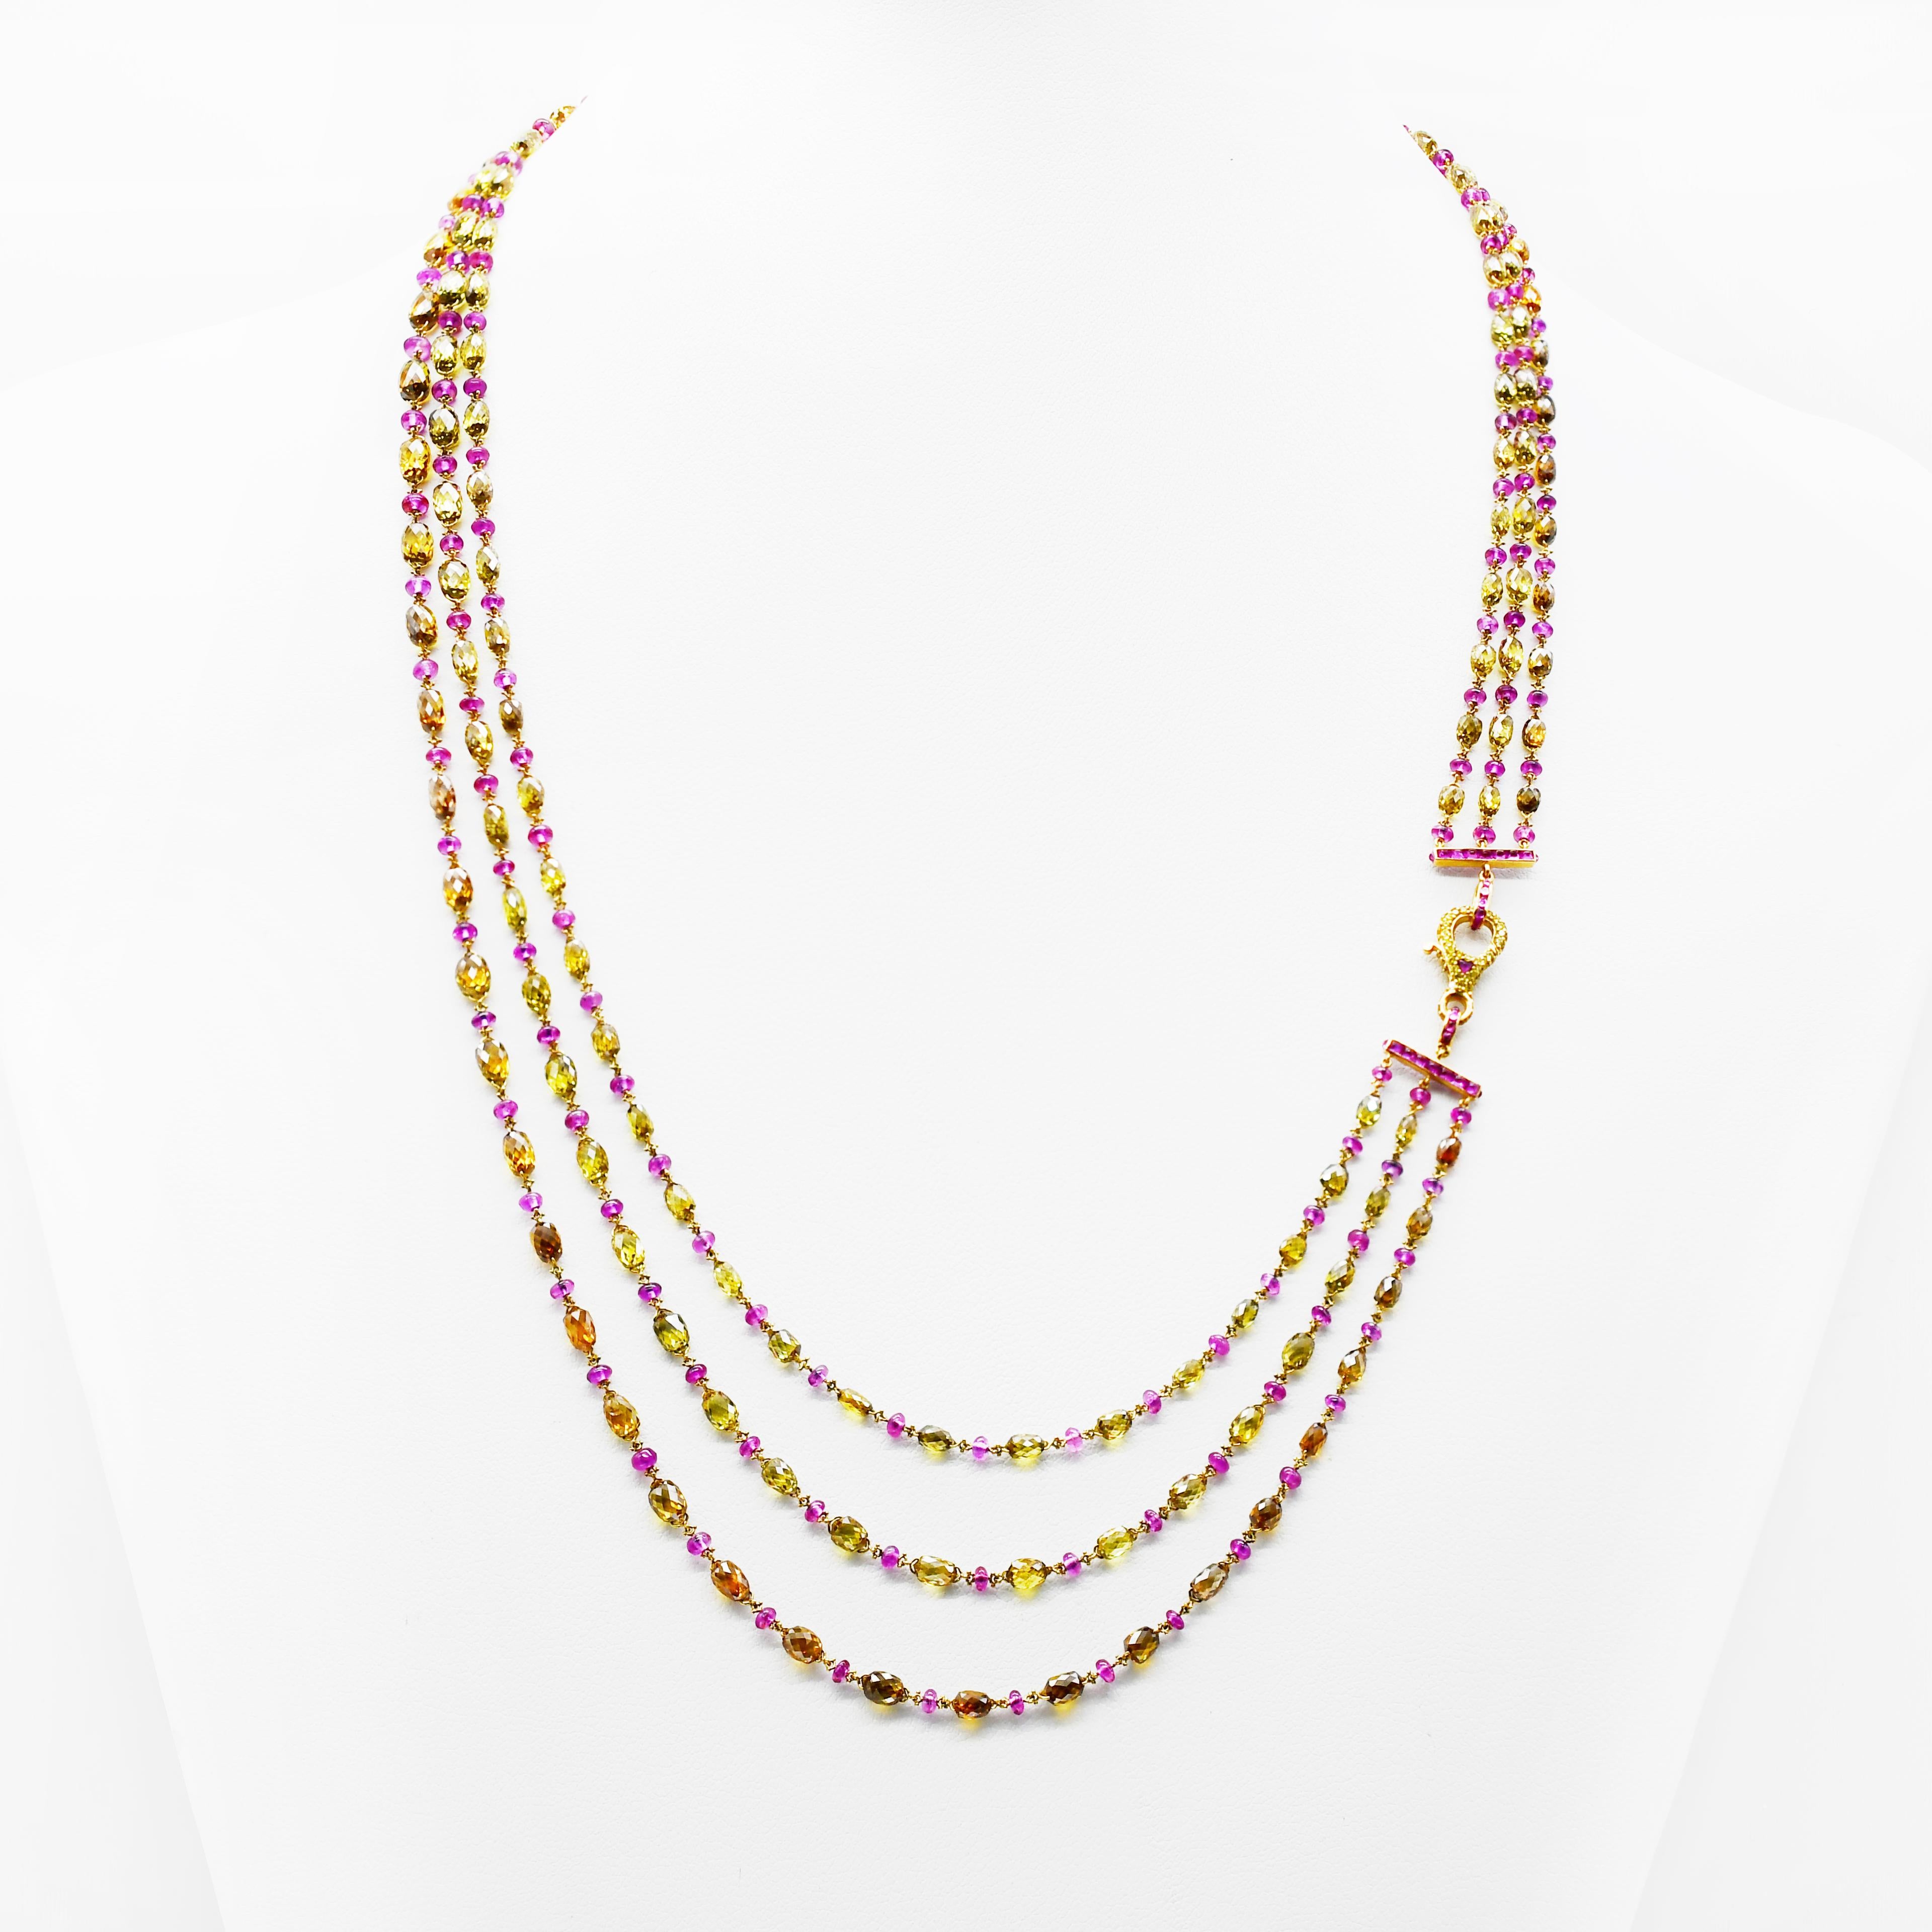 This Three Line Necklace Features 18 Karat Yellow Gold With A Combination Of  Non-Heated Burmish Ruby And Mix Fancy Color Diamond Briolette with Studded Lock.
It Has Total 45.37 Carats In House Polished Natural Fancy Color Diamond Briolettes and